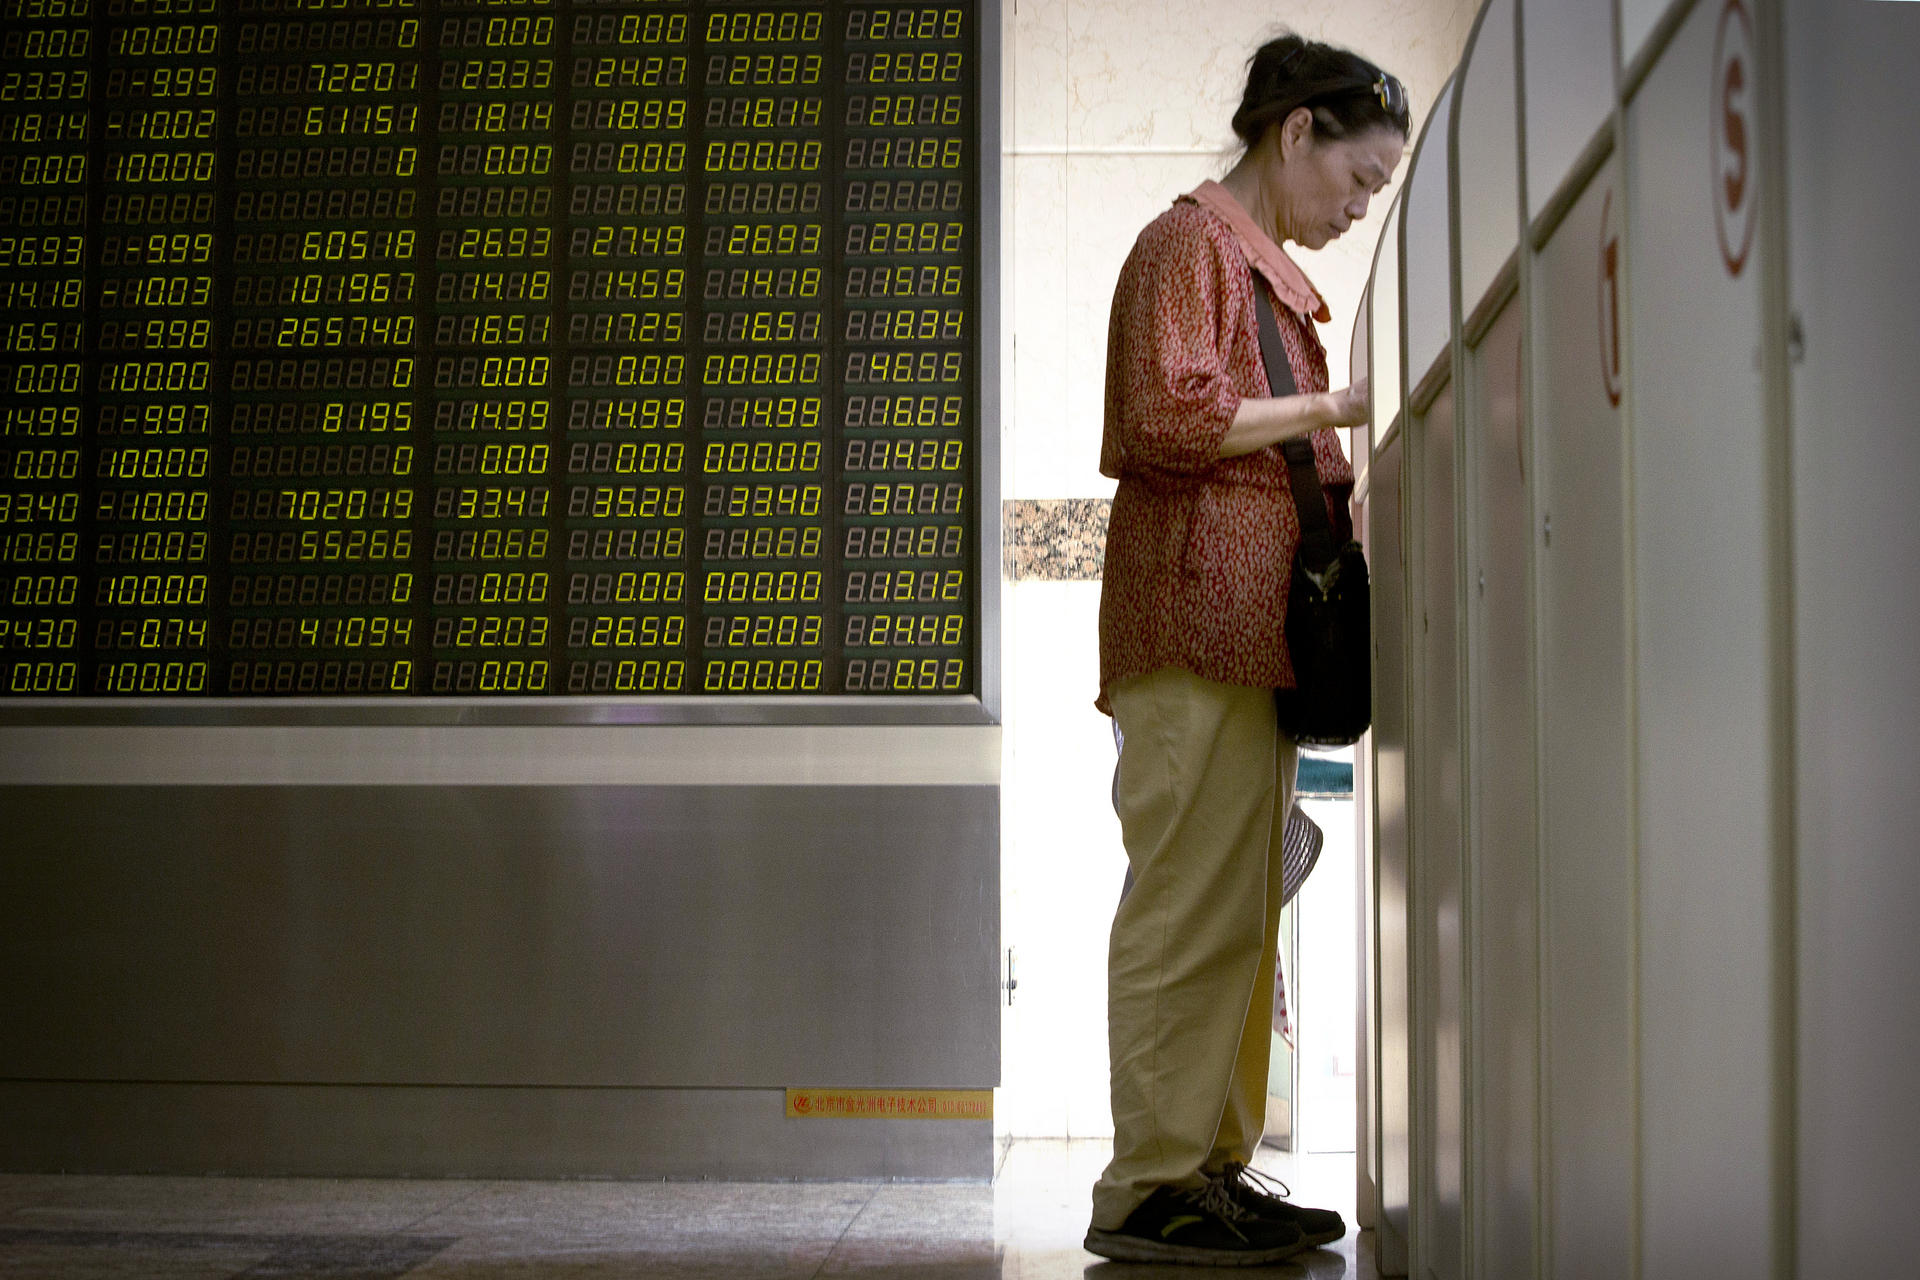 An investor monitors stock prices at a brokerage house in Beijing. Photo: AP